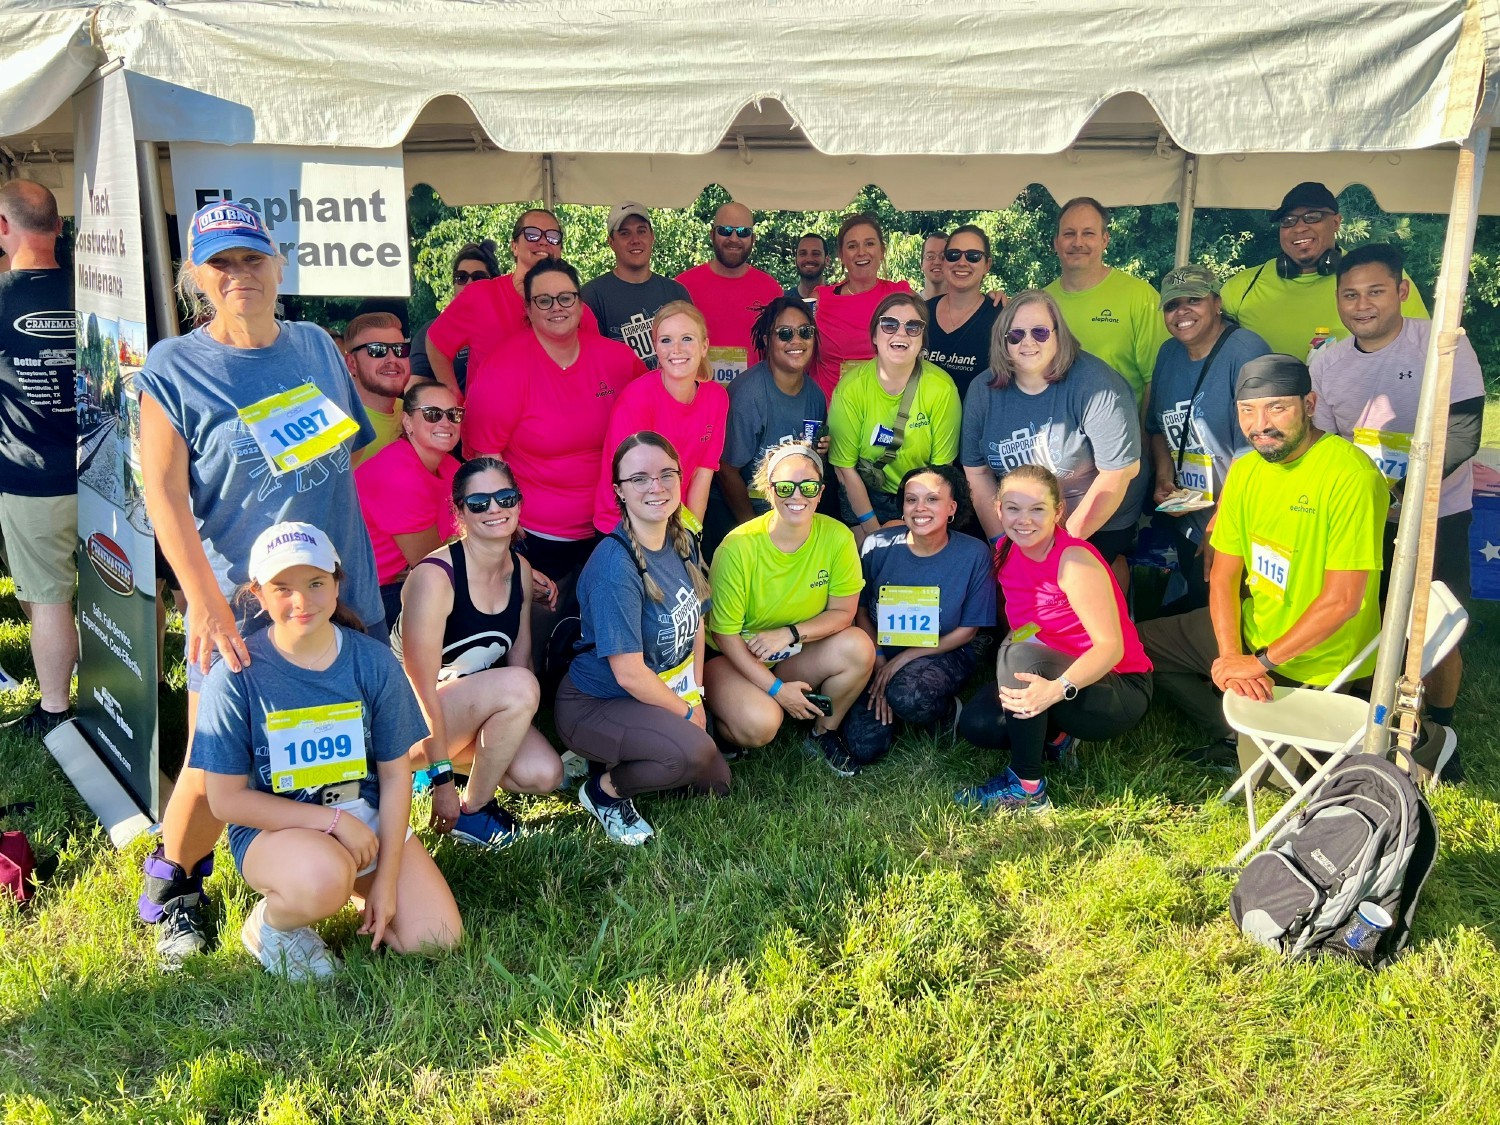 June 22: Employees participated in the Anthem Corporate 5k. Entry was covered by our Run Elephant Run benefit! 